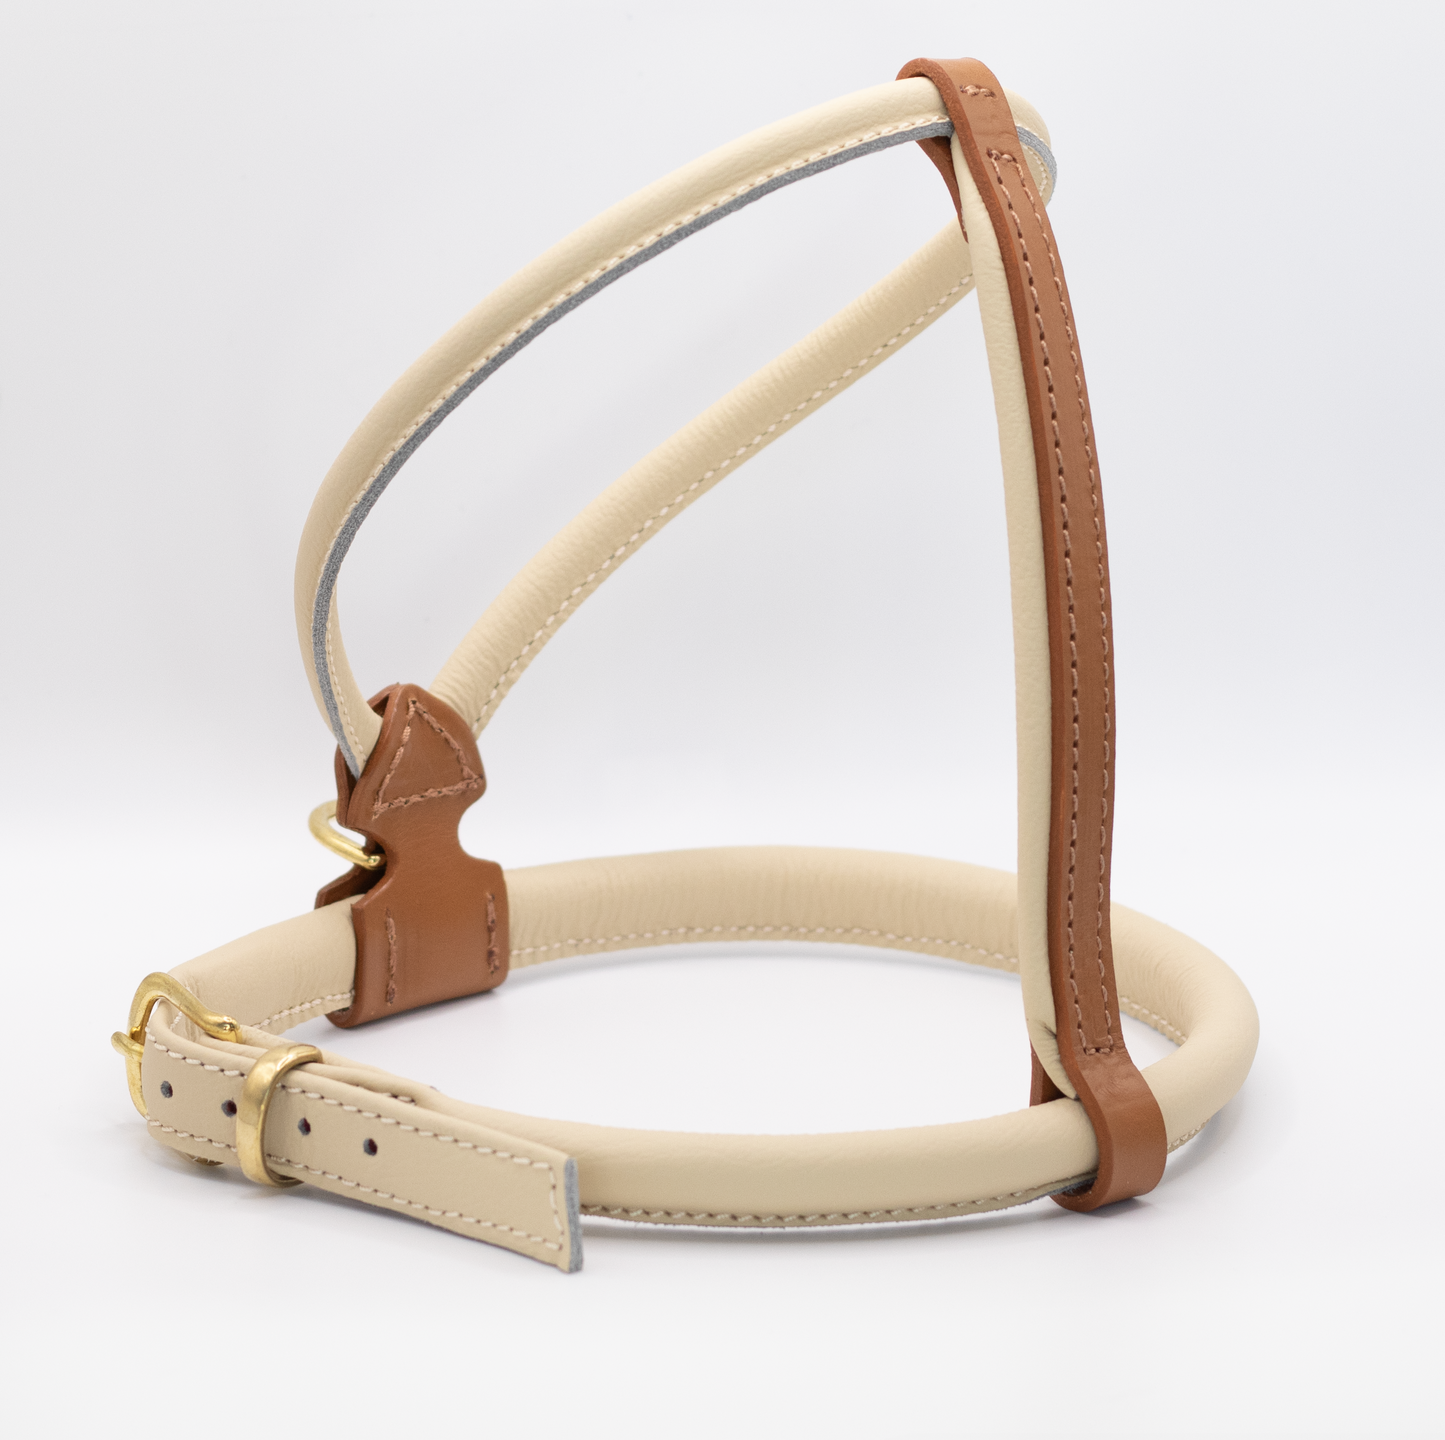 D&H Rolled Leather Dog Harness Cream